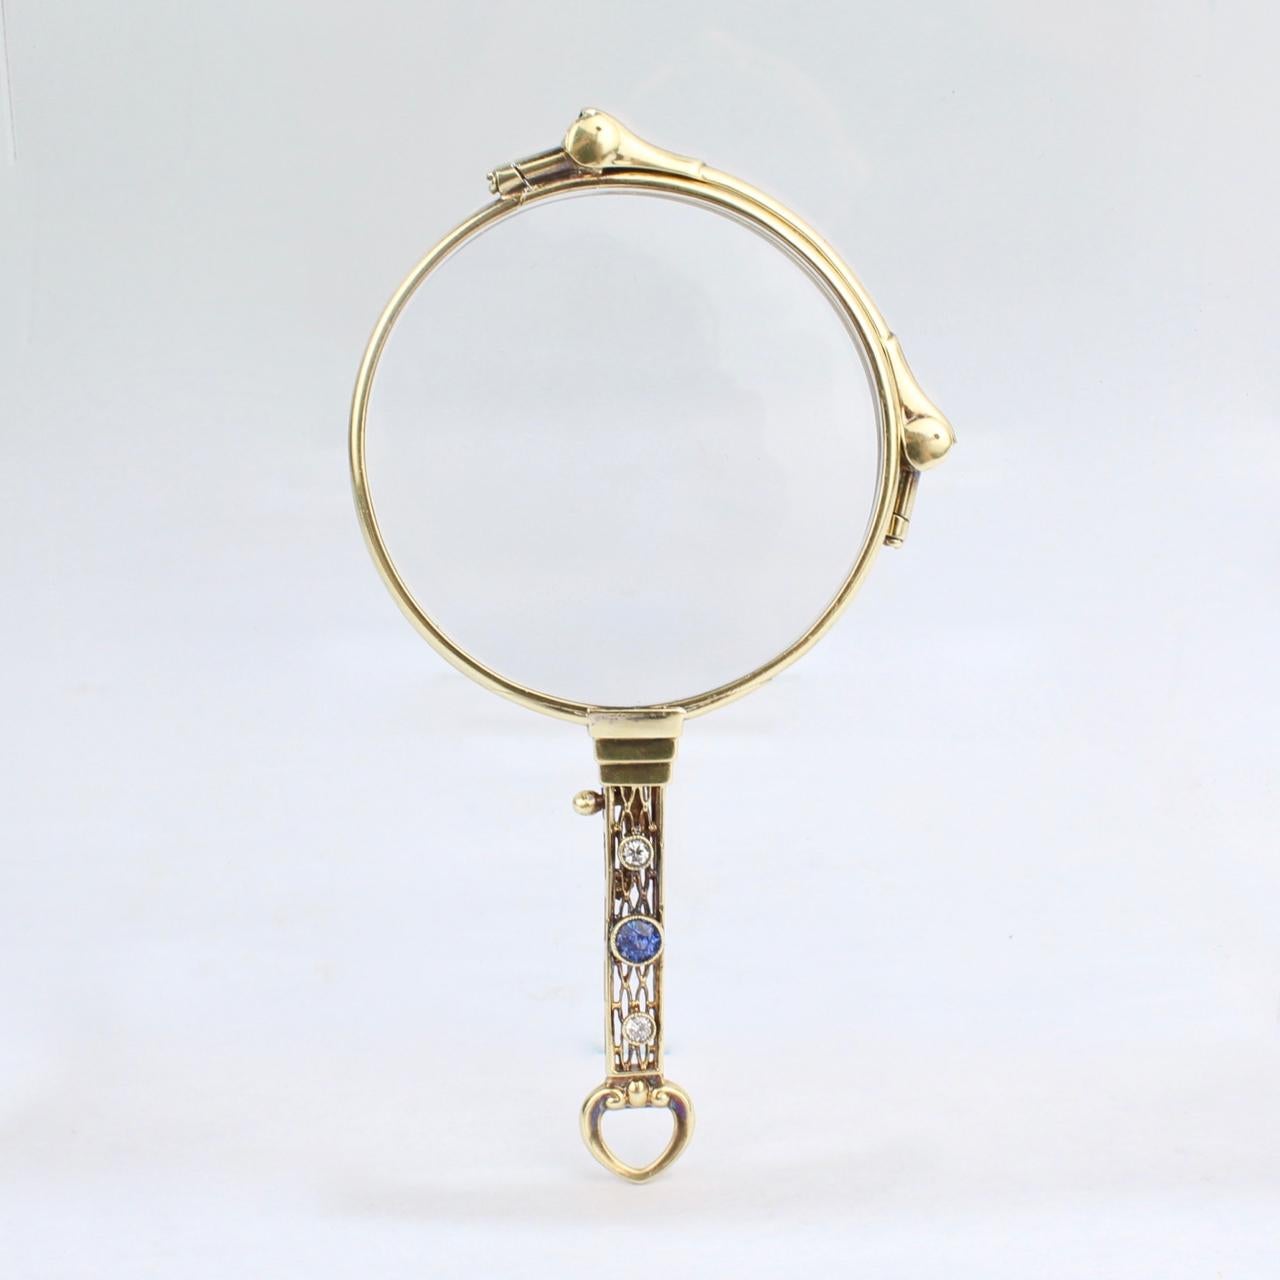 A wonderful Art Deco period 14-karat gold lorgnette. 

The openwork handle set with a 38mm diameter round cut sapphire and two .07ct round cut accent diamonds.

Still perfectly functional as reading glasses and simply beautiful Deco design!

Marked